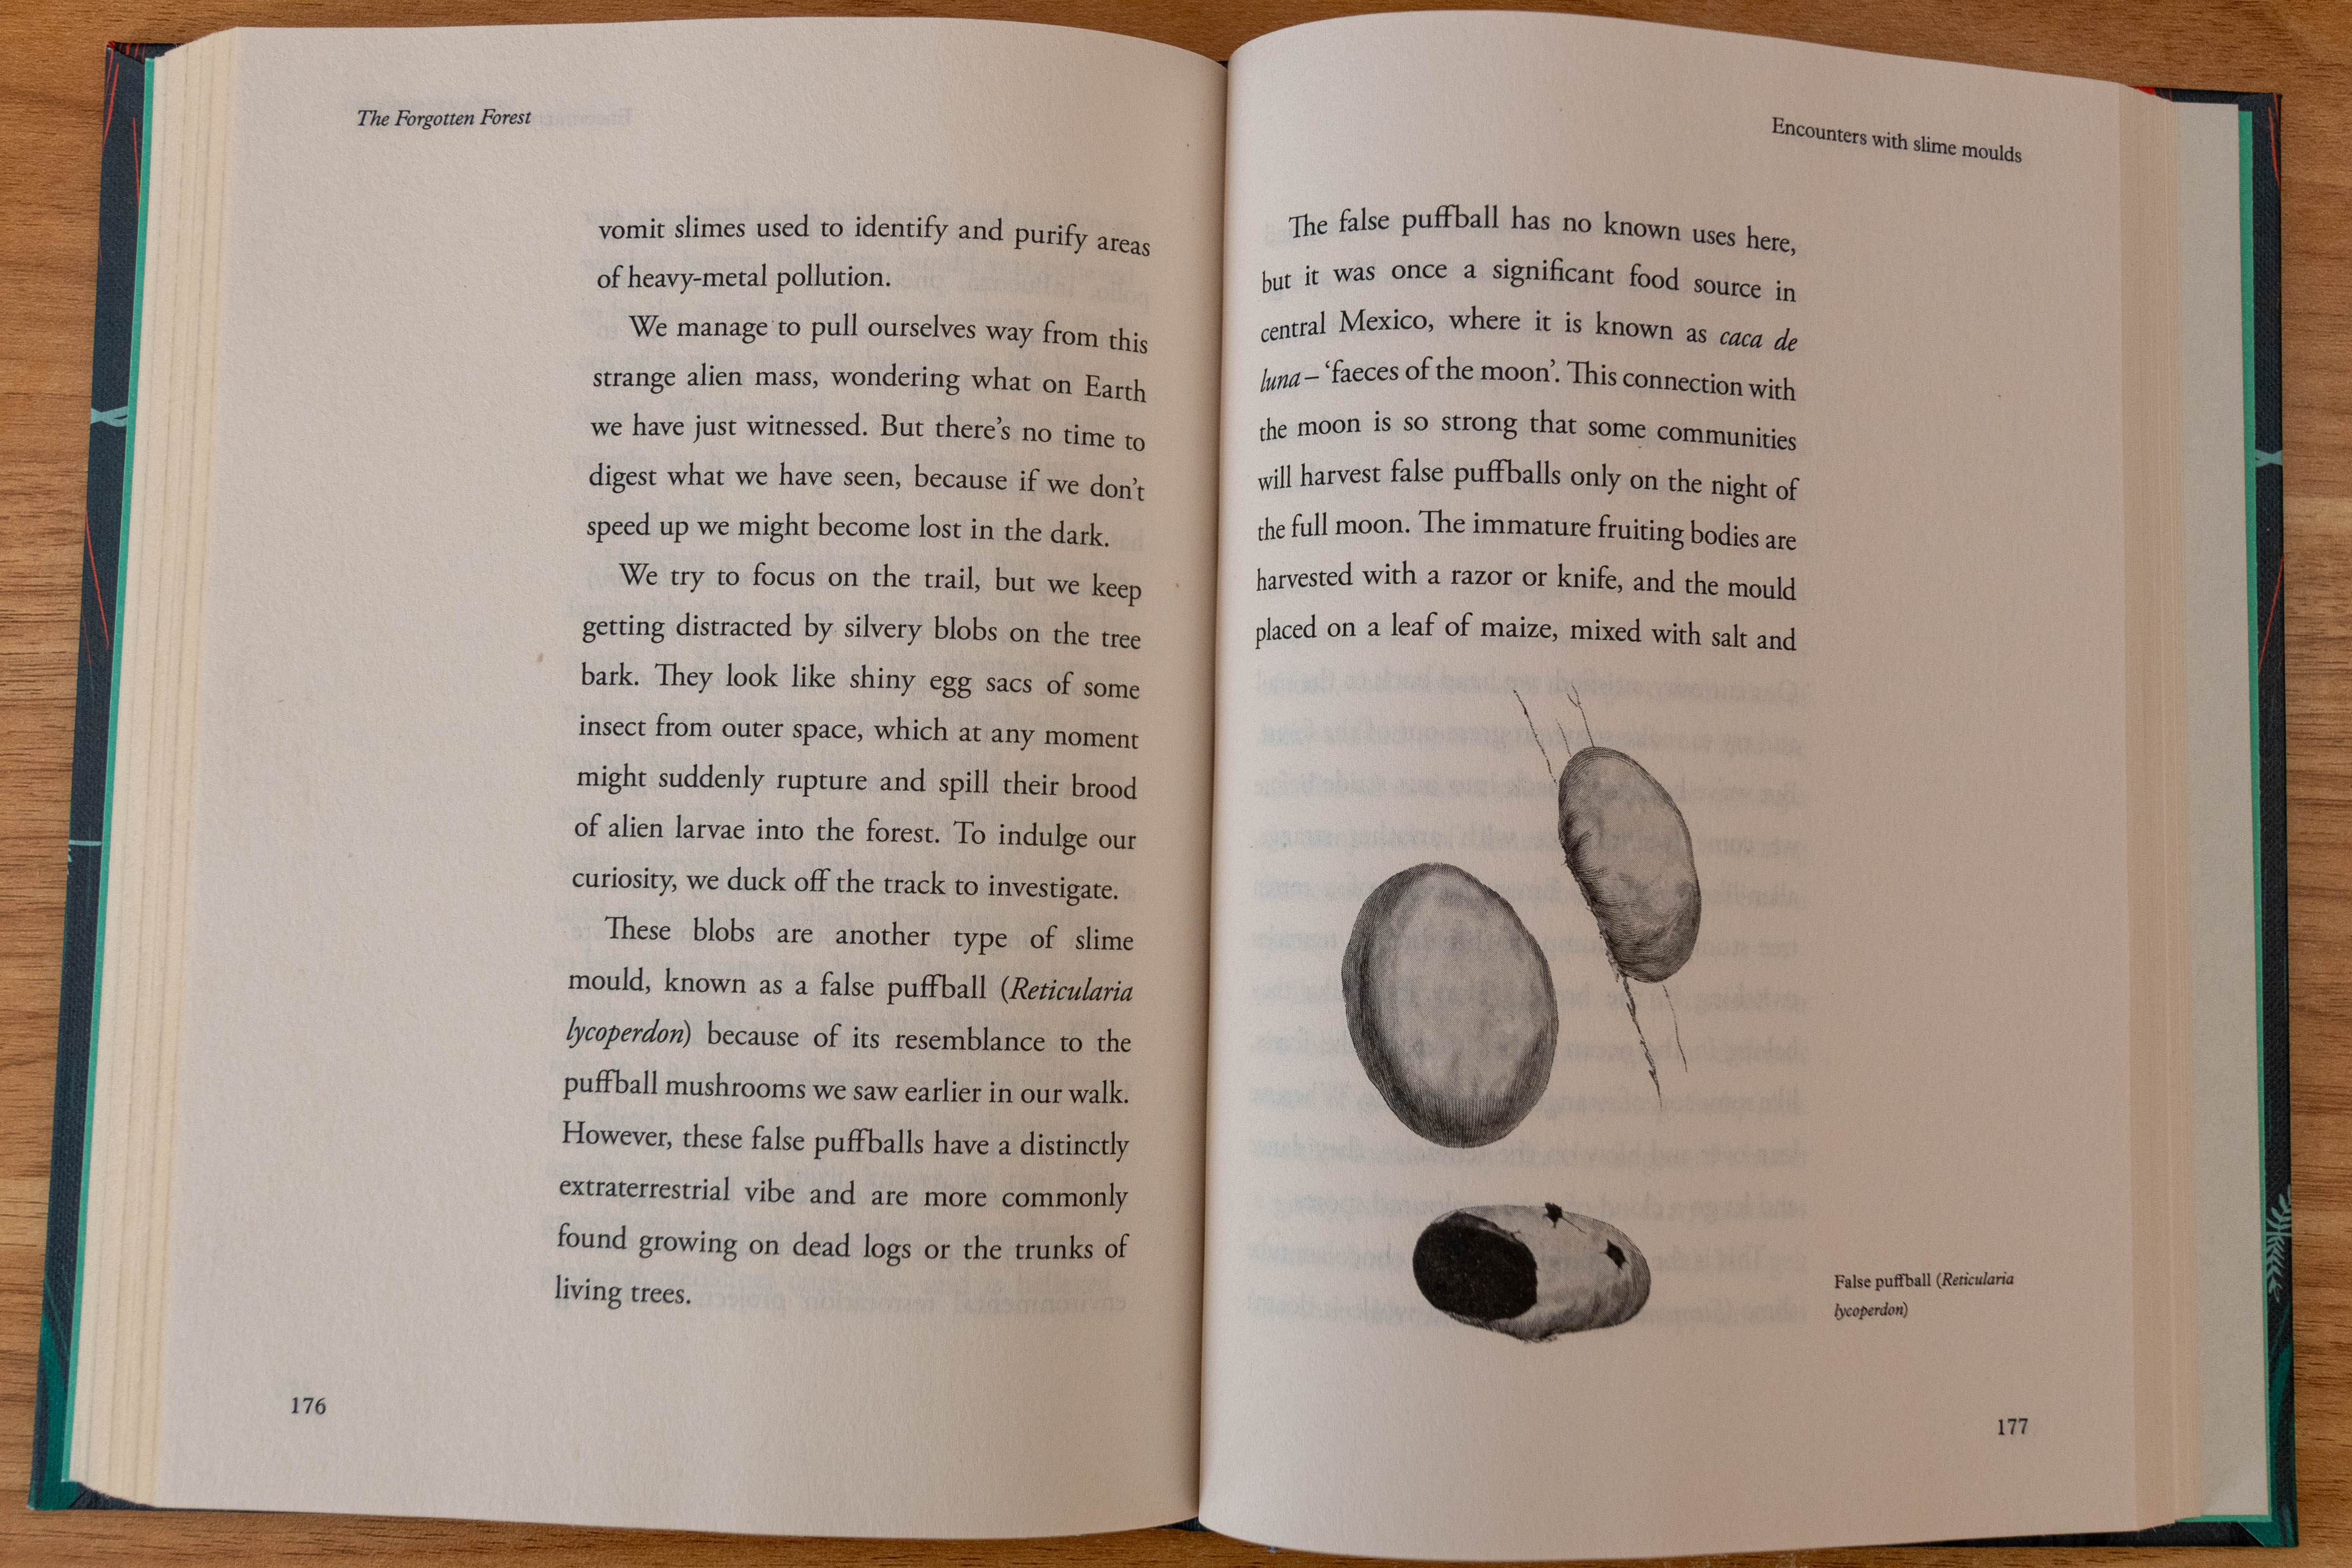 The forgotten forest book, open at page 176 showing margins and inline image